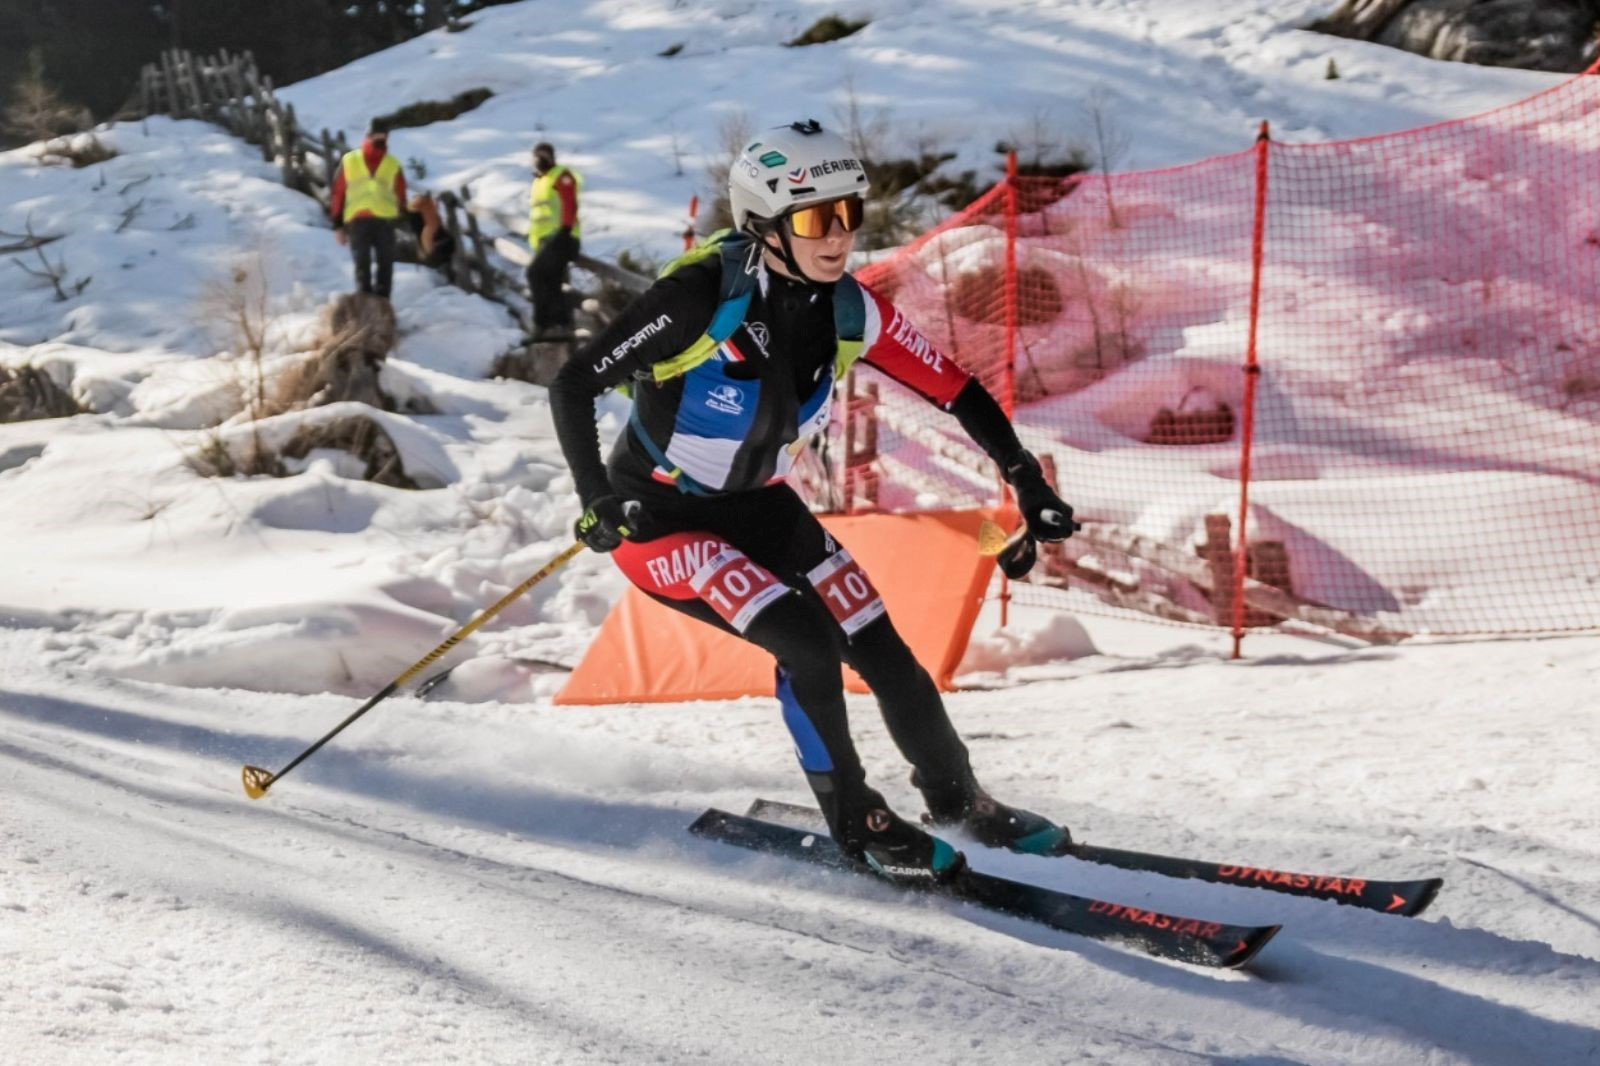 Defending champion Emily Harrop will be hoping for a winning start in home conditions ©ISMF